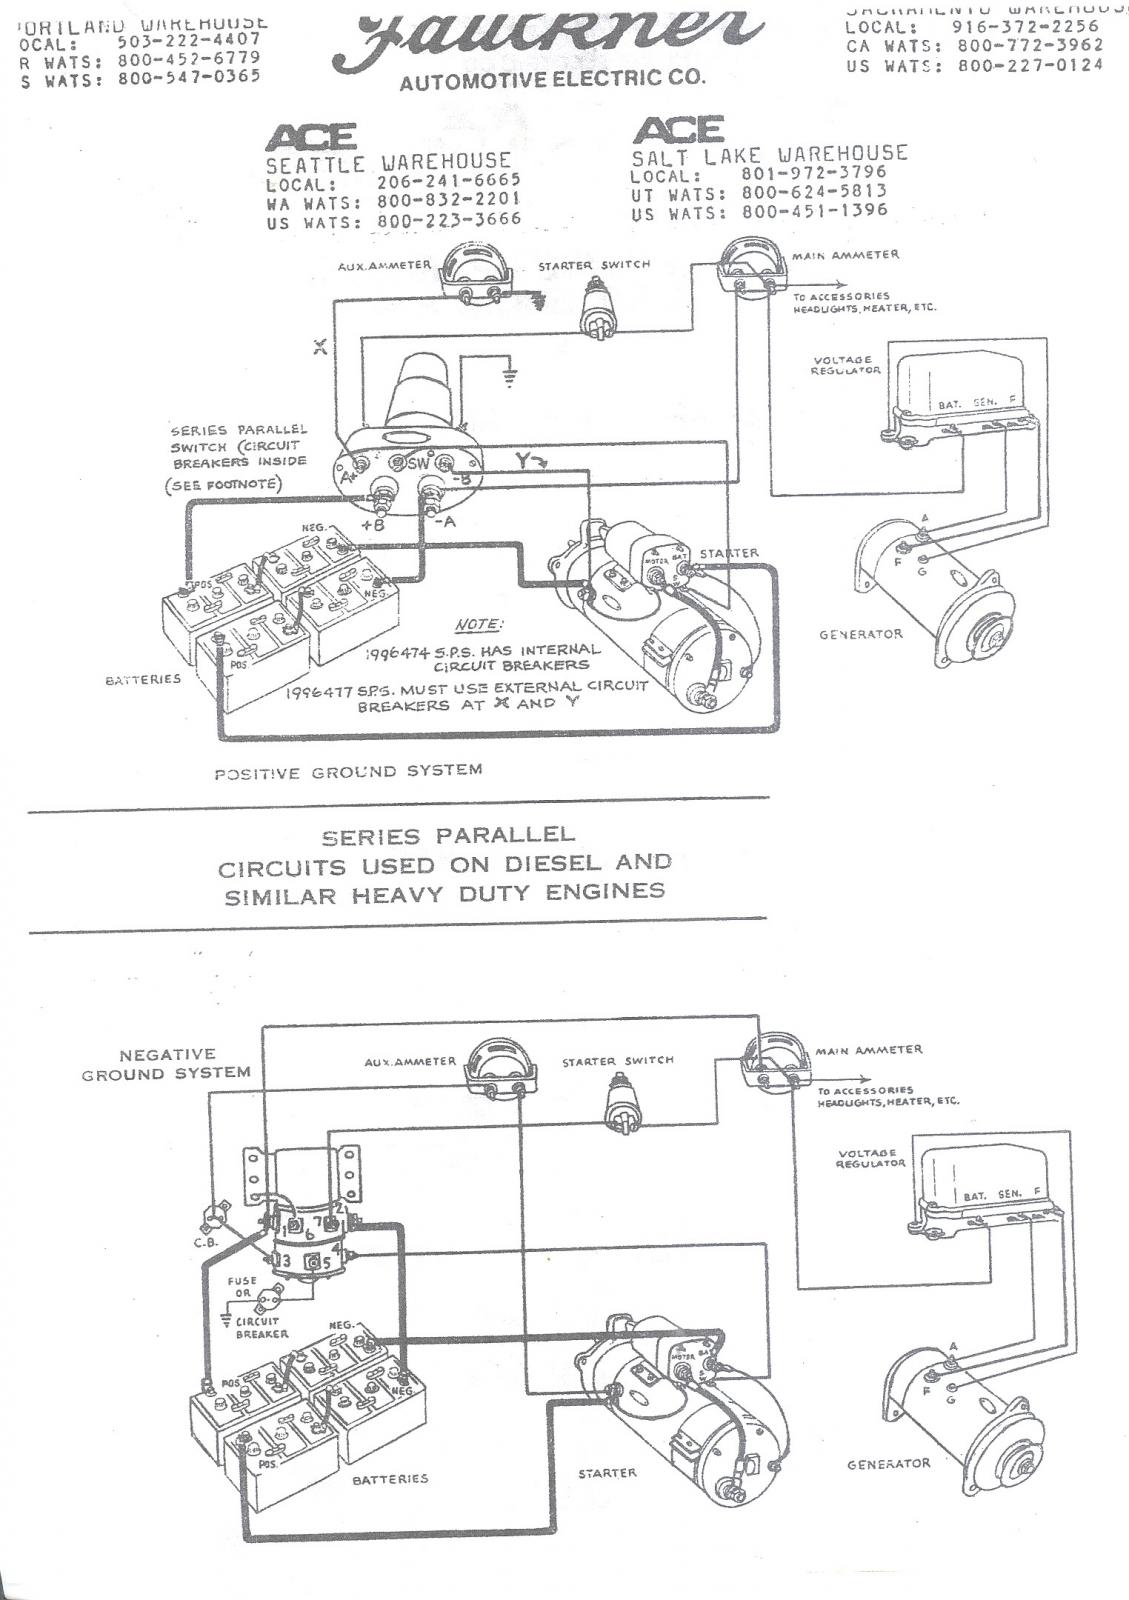 Wiring schematic for Series Parallel switch - Antique ...